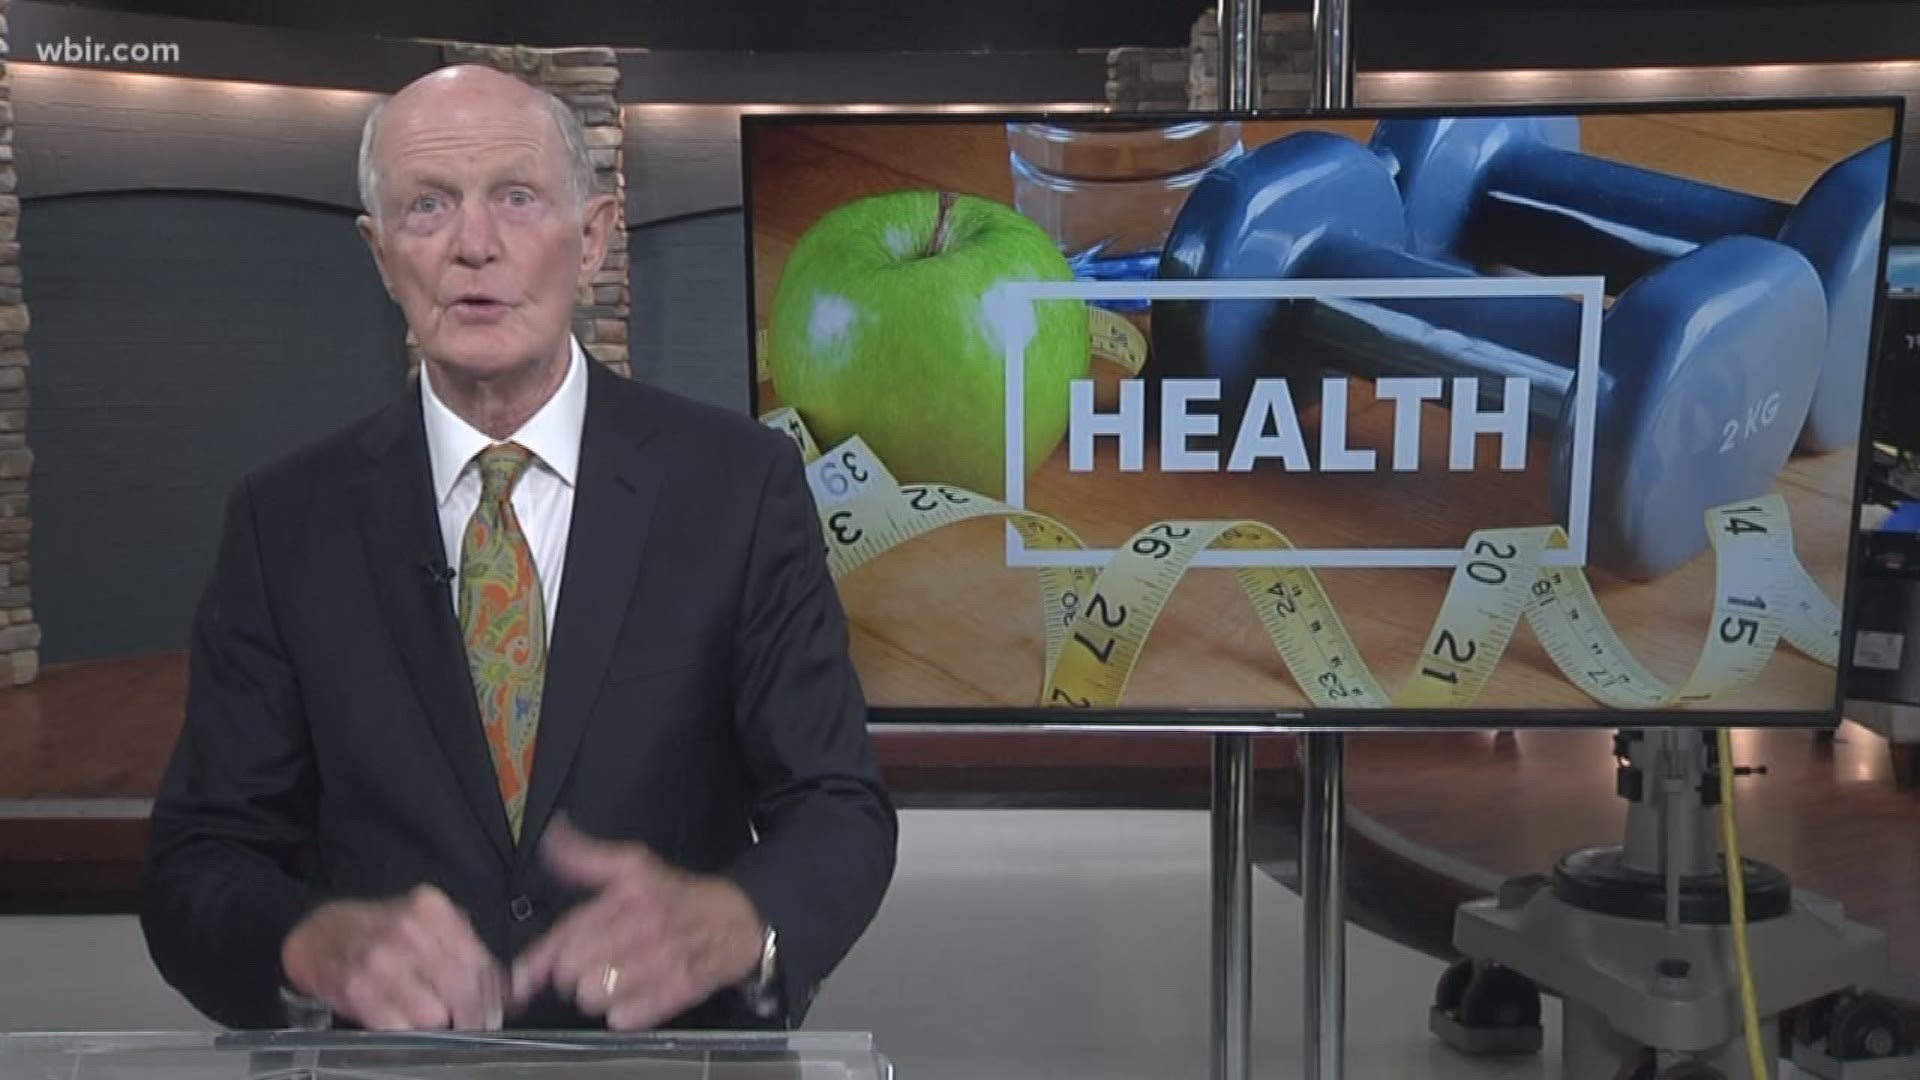 Dr. Bob explains that chest pain may not be caused by a heart problem.